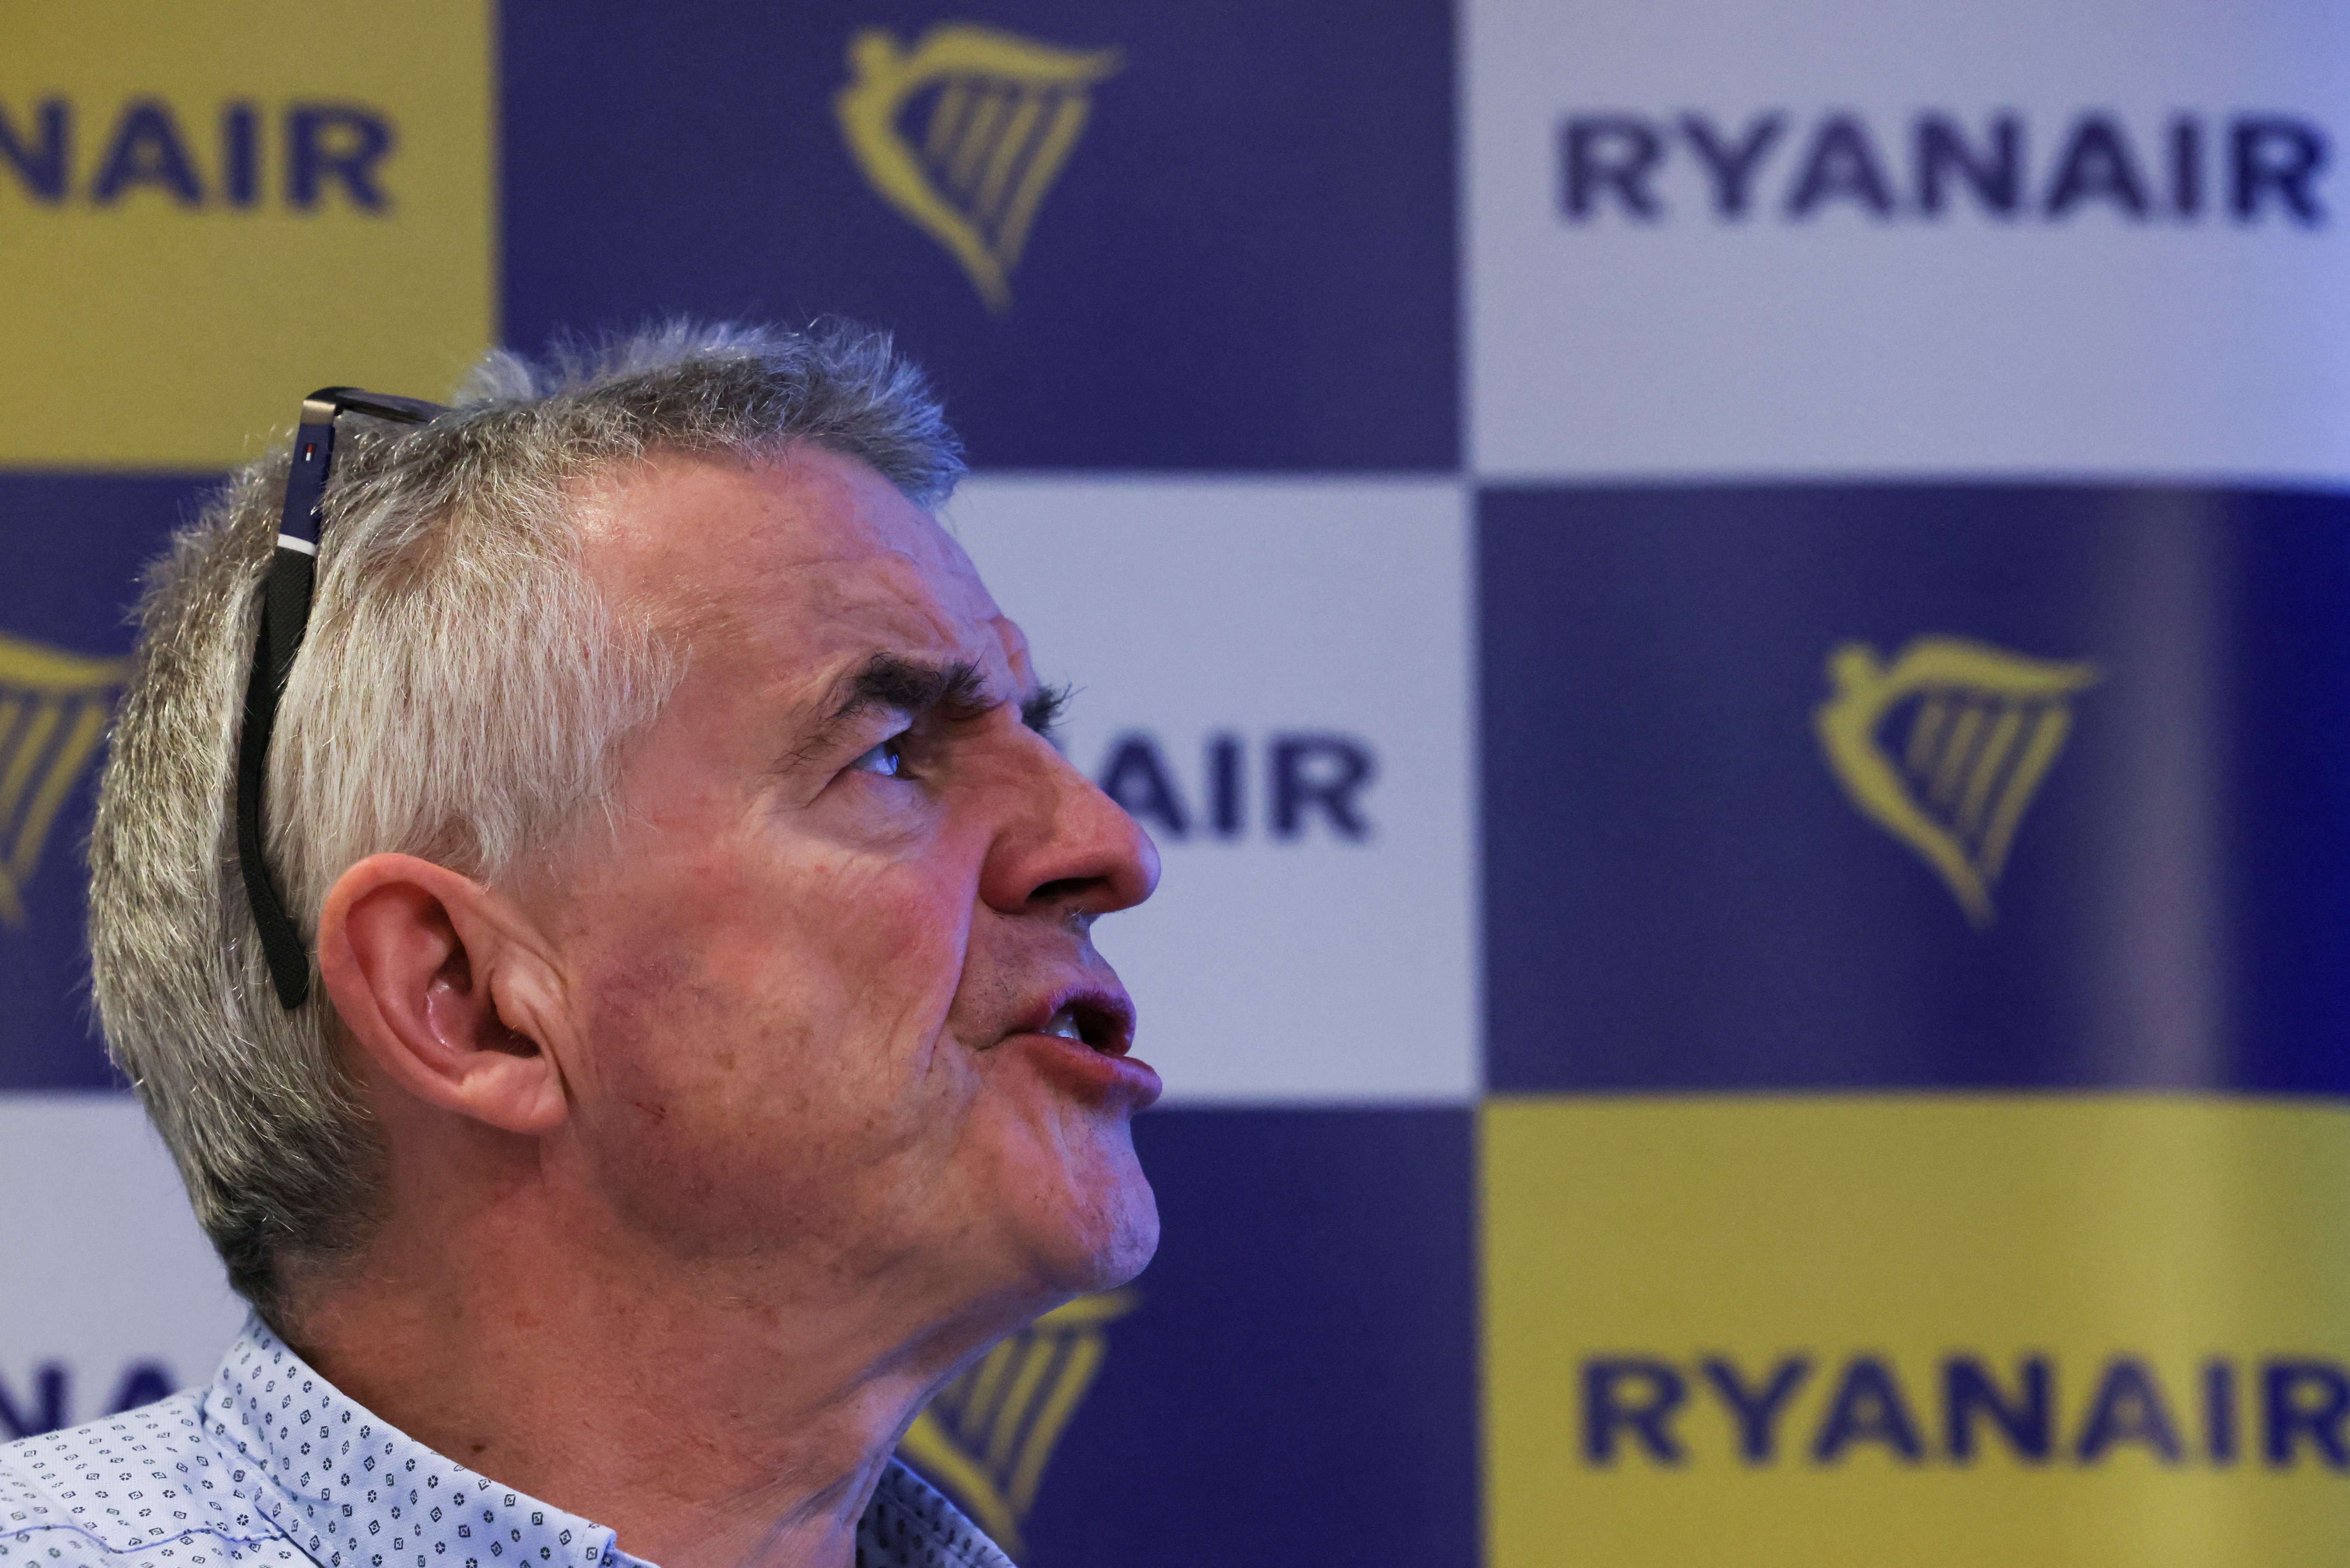 Ryanair CEO Michael O'Leary attends a news conference in Brussels